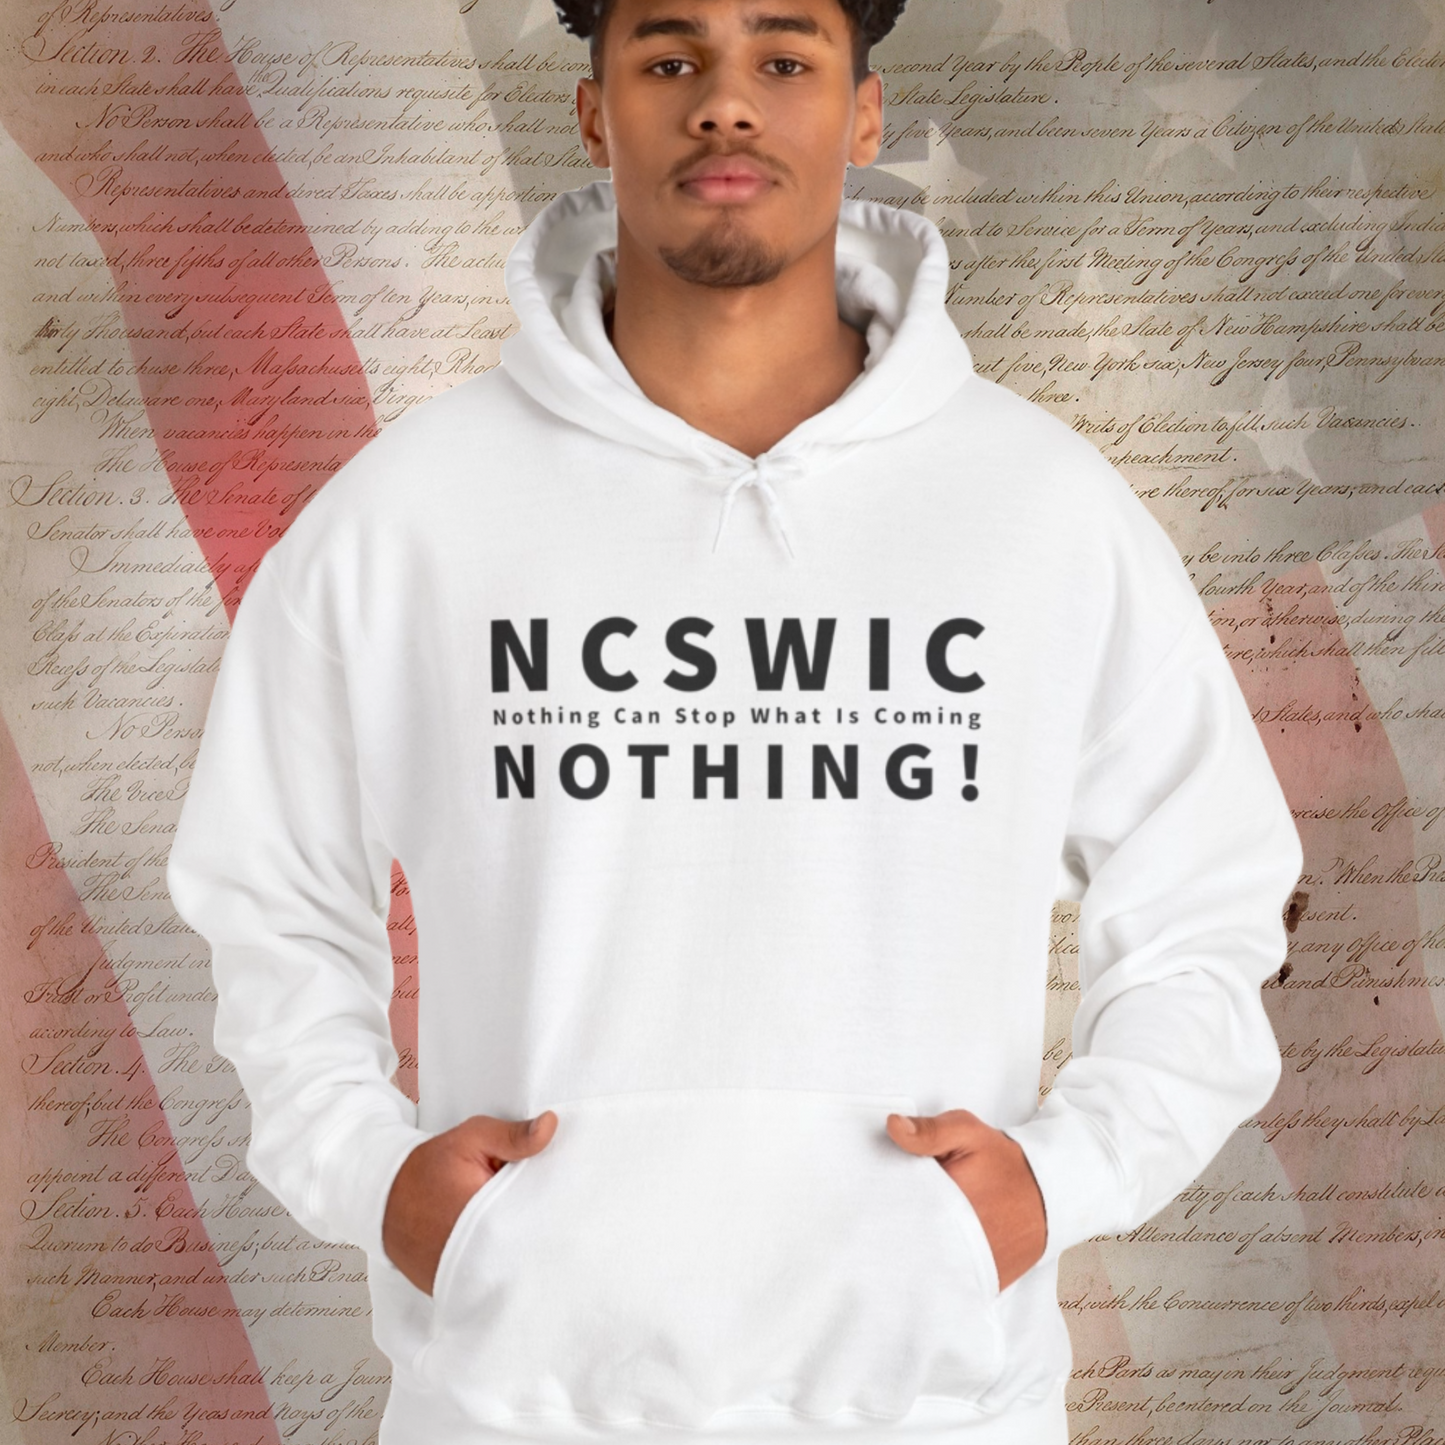 NCSWIC Hooded Sweatshirt For Conservative Hoodie For Patriot Message